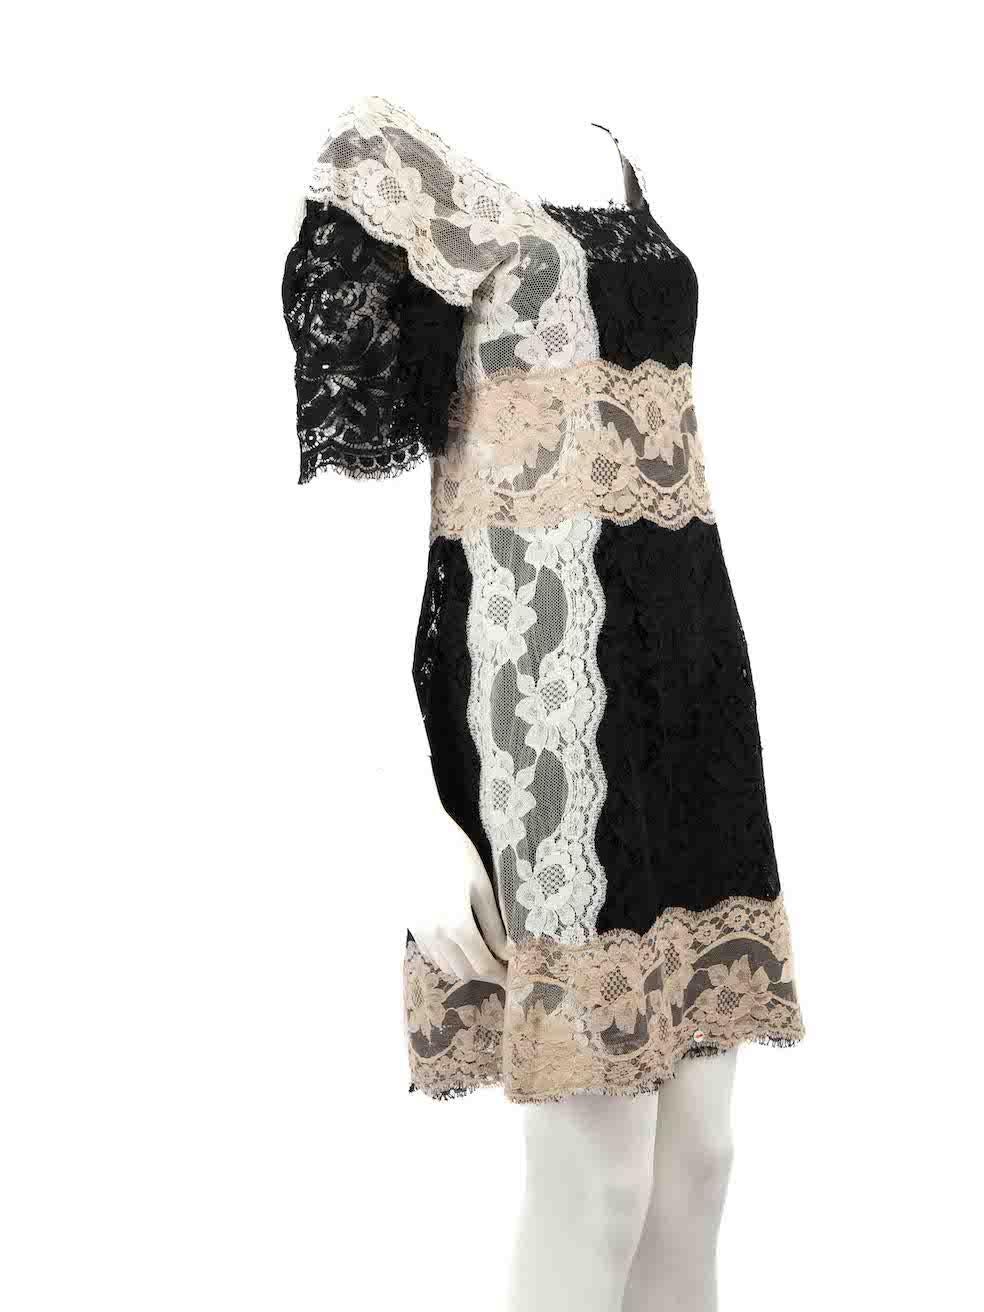 CONDITION is Very good. General wear to dress is evident. Moderate signs of wear to the right-side of bust with discolouration on this used Dolce & Gabbana designer resale item.
 
 
 
 Details
 
 
 Black
 
 Lace
 
 Dress
 
 White and beige lace